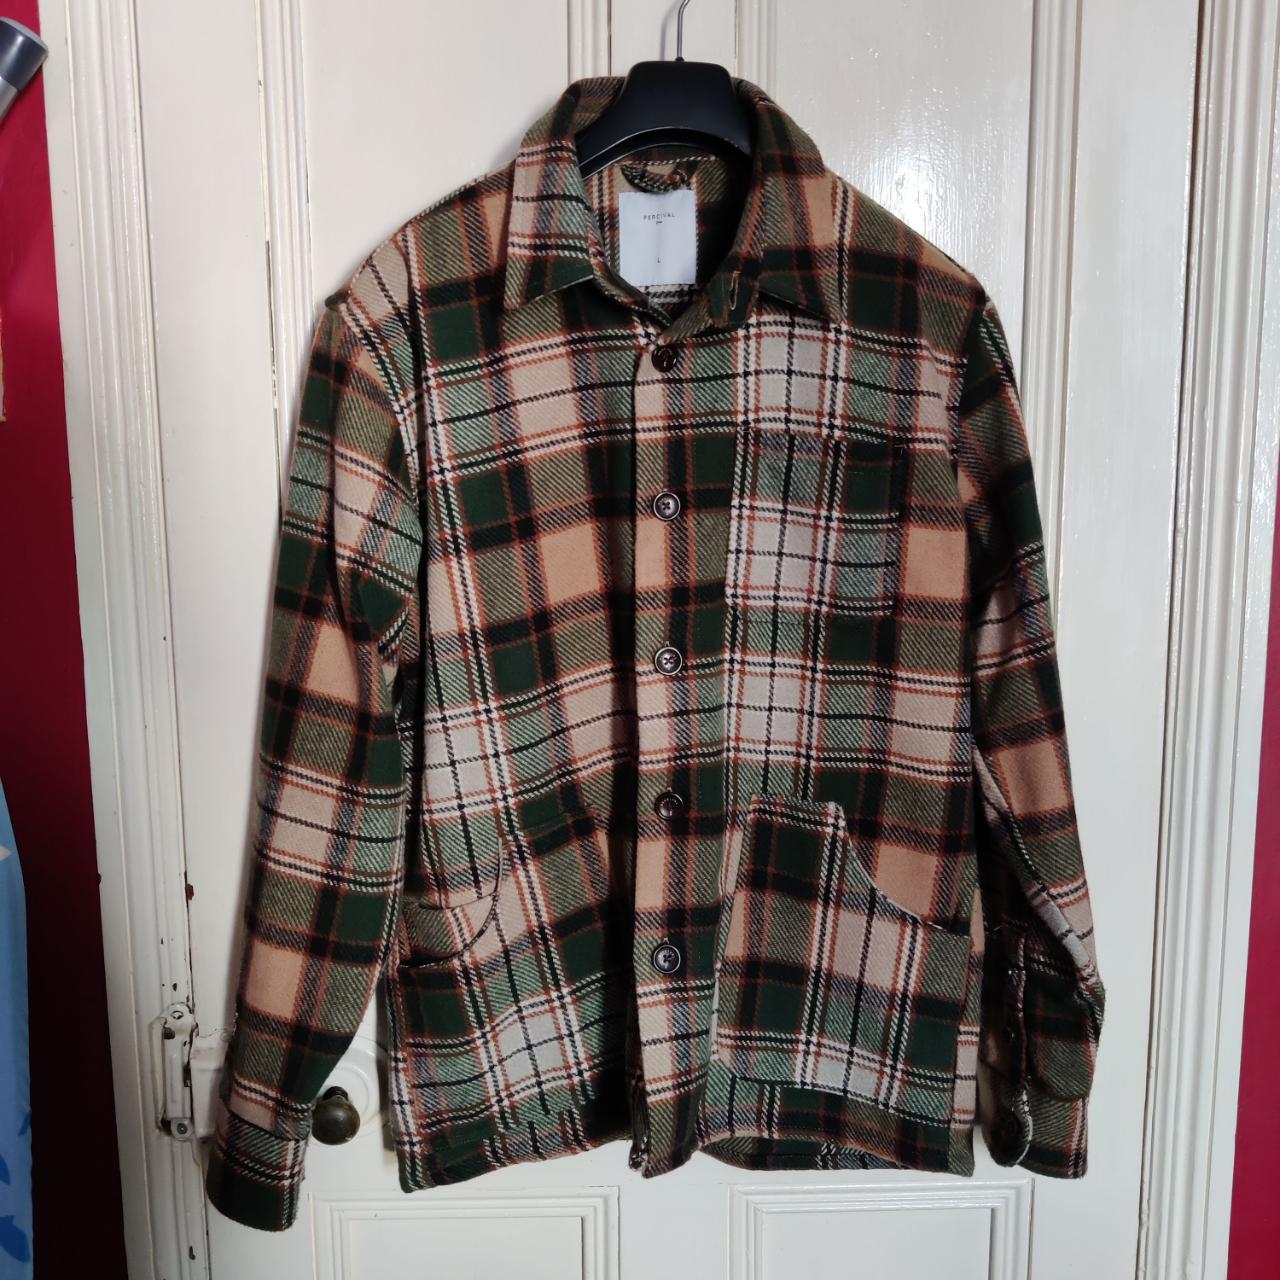 Percival Wool Overshirt/jacket Really lovely piece,... - Depop